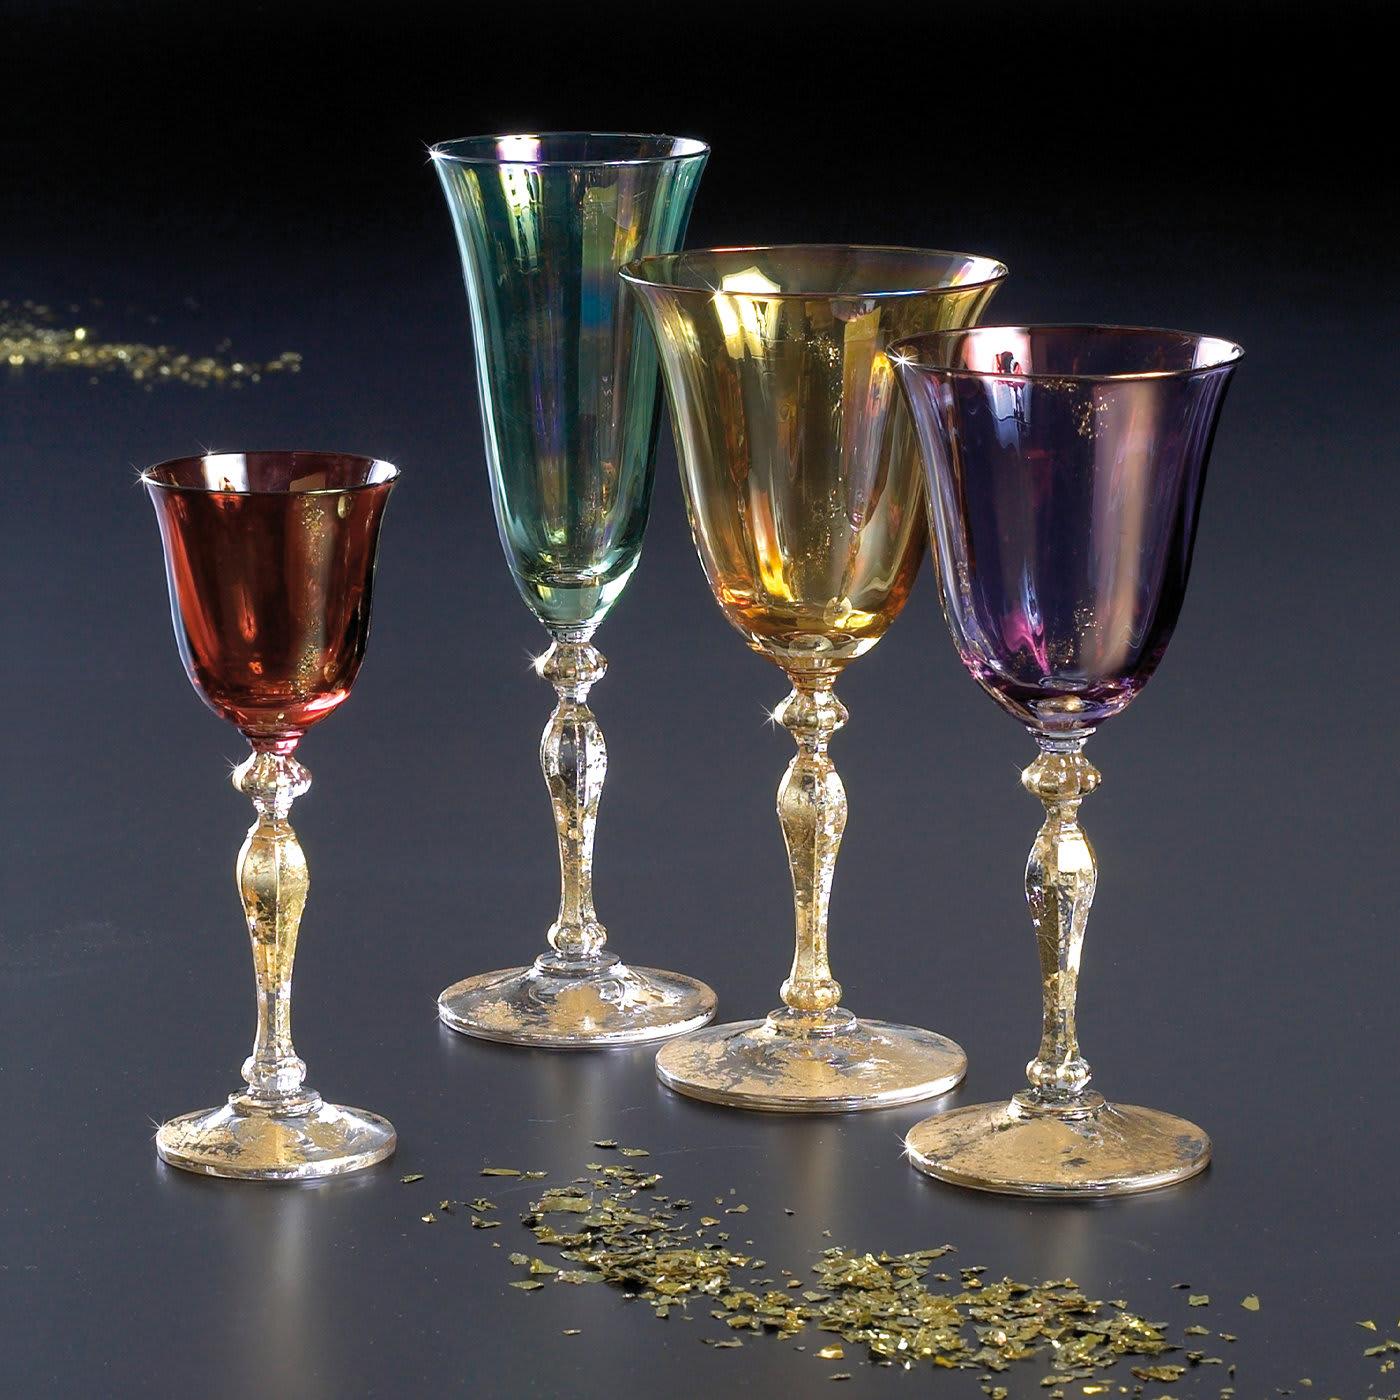 The embodiment of an opulent and lavish design style, this set of four mixed glasses exudes modern and sophisticated charm distinguished by a creative use of color. Eclectic and fascinating, it comprises a water glass, a wine glass, a liquor glass,